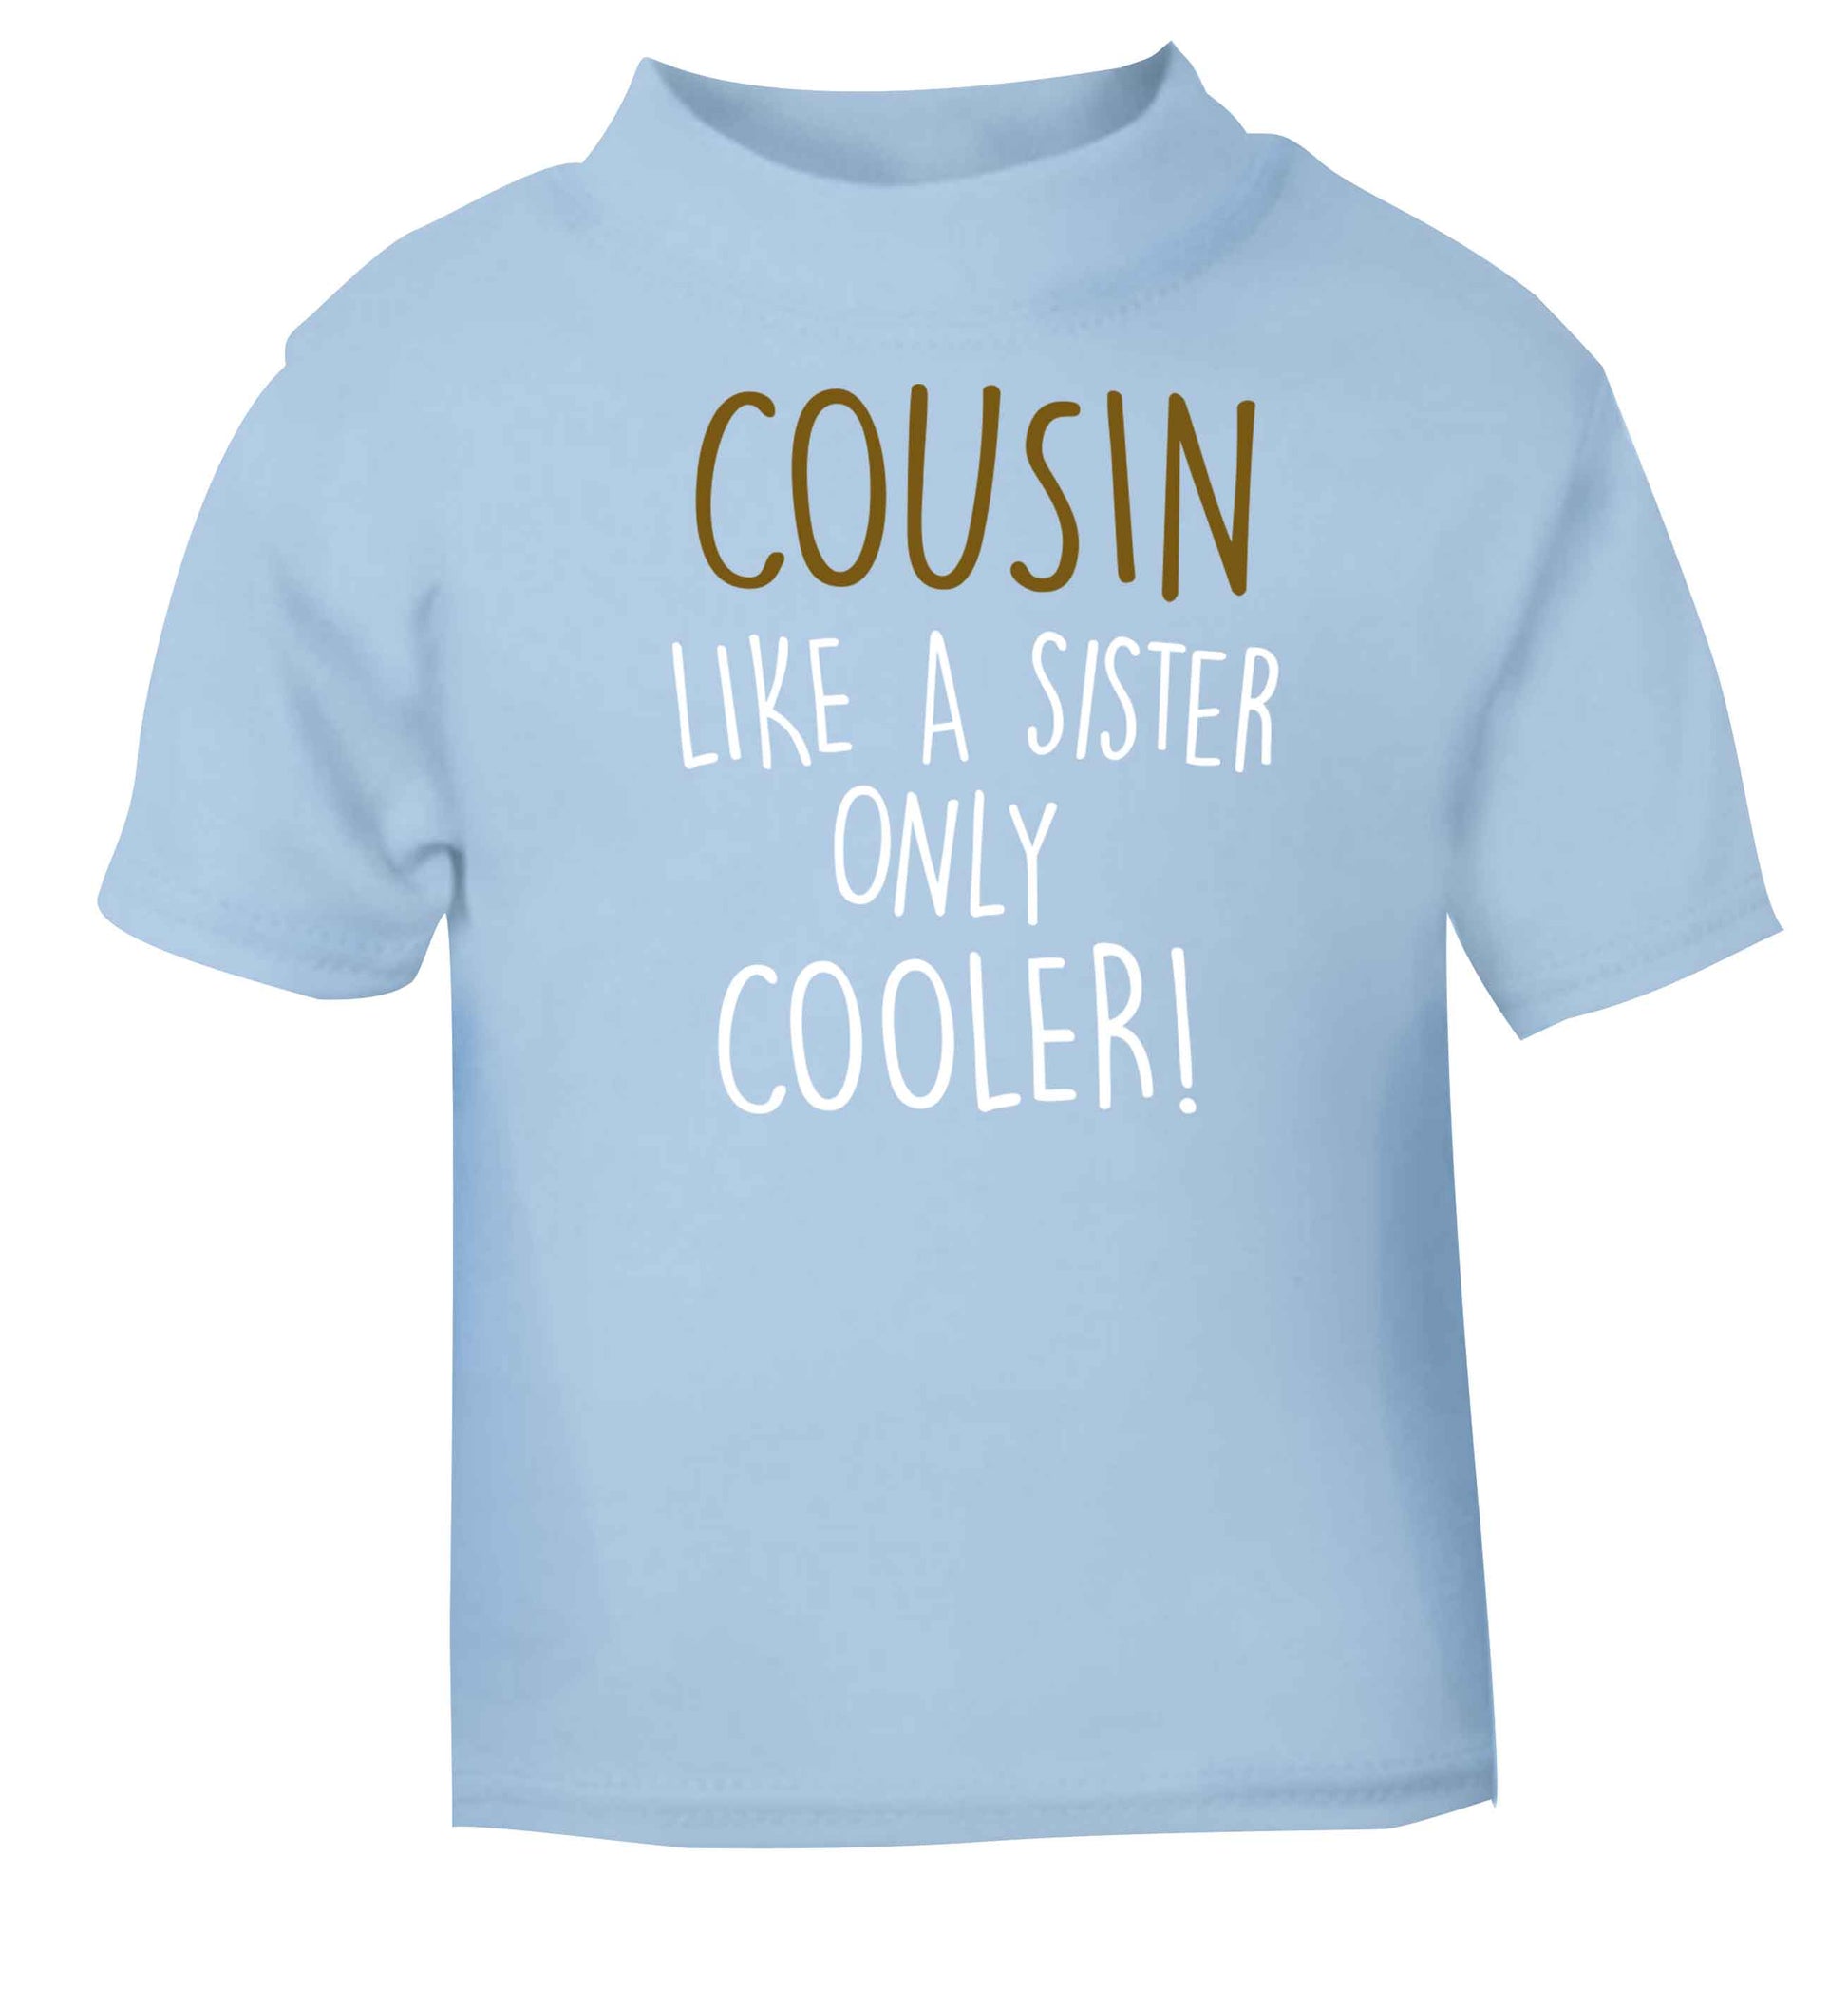 Cousin like a sister only cooler light blue baby toddler Tshirt 2 Years